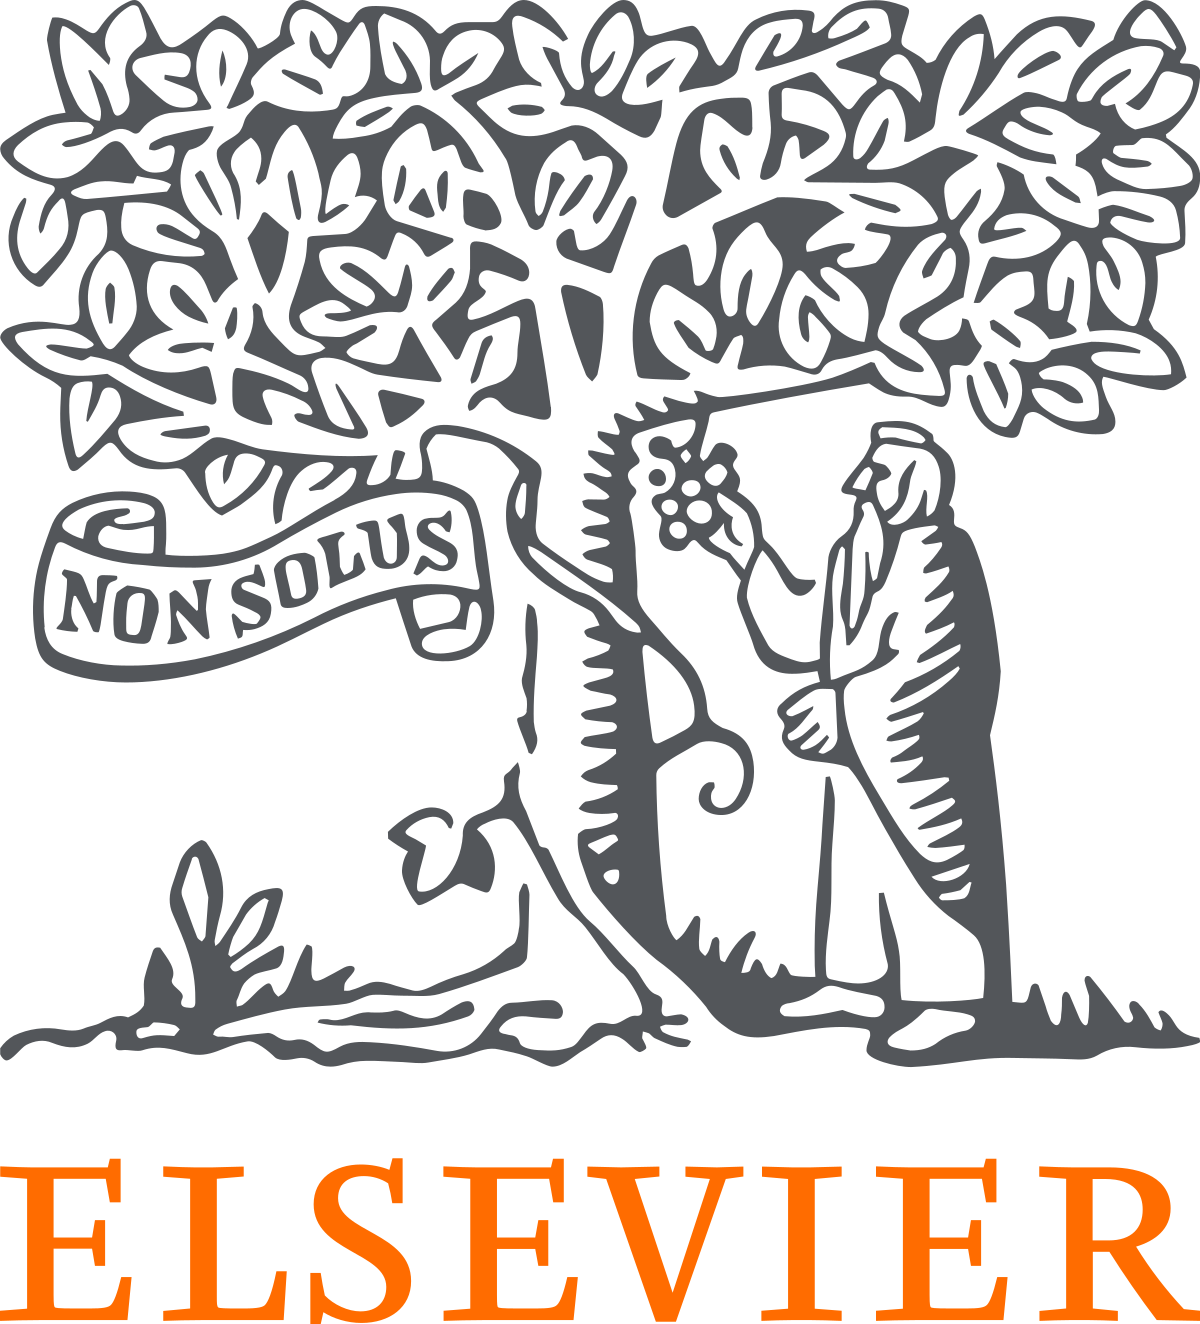 All articles in open access journals which are published by Elsevier have undergone peer review and upon acceptance are immediately and permanently free for everyone to read and download.